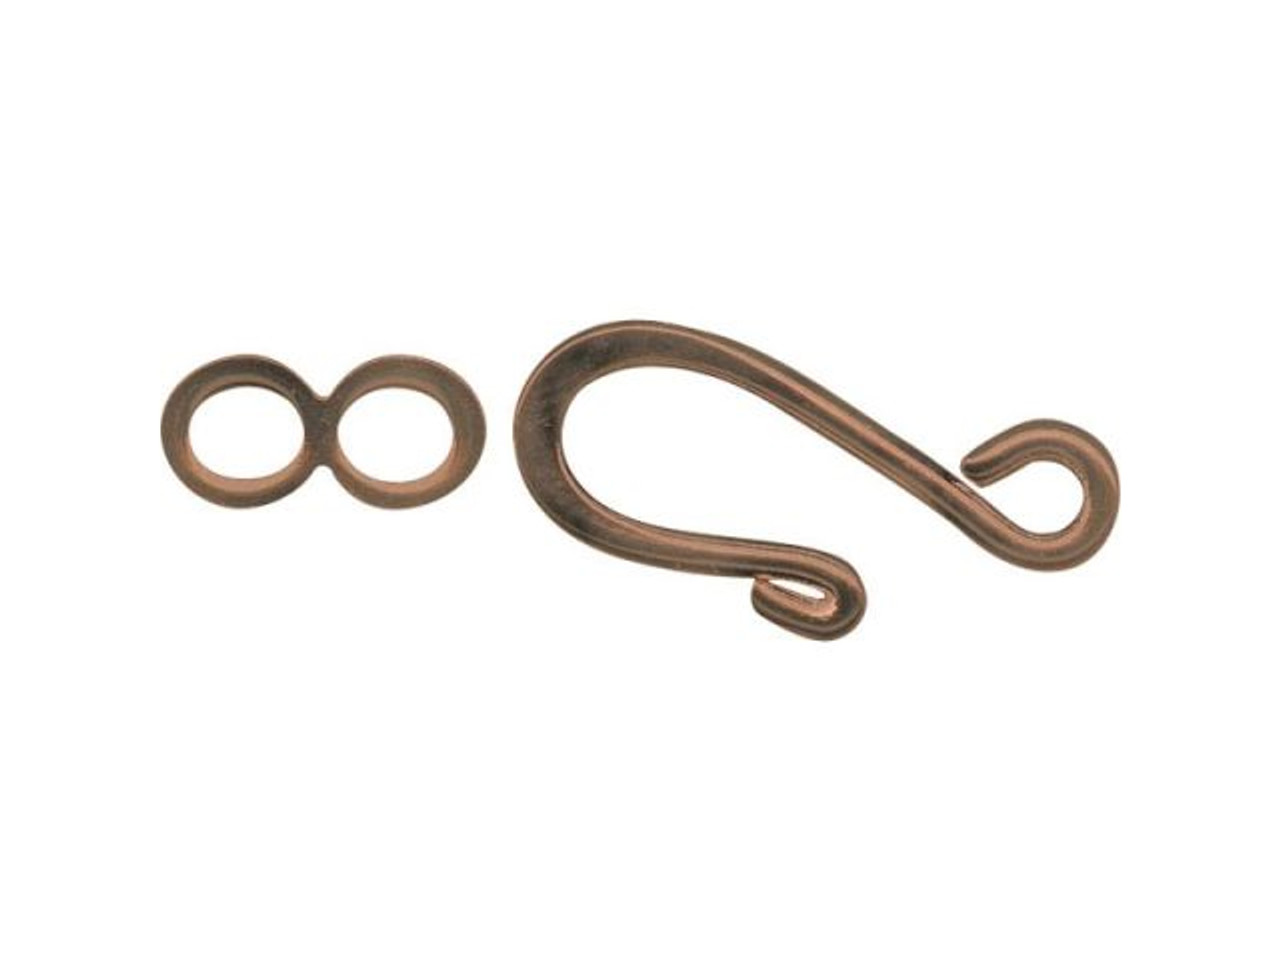 Antiqued Copper Plated Hook and Eye Clasp (gross)